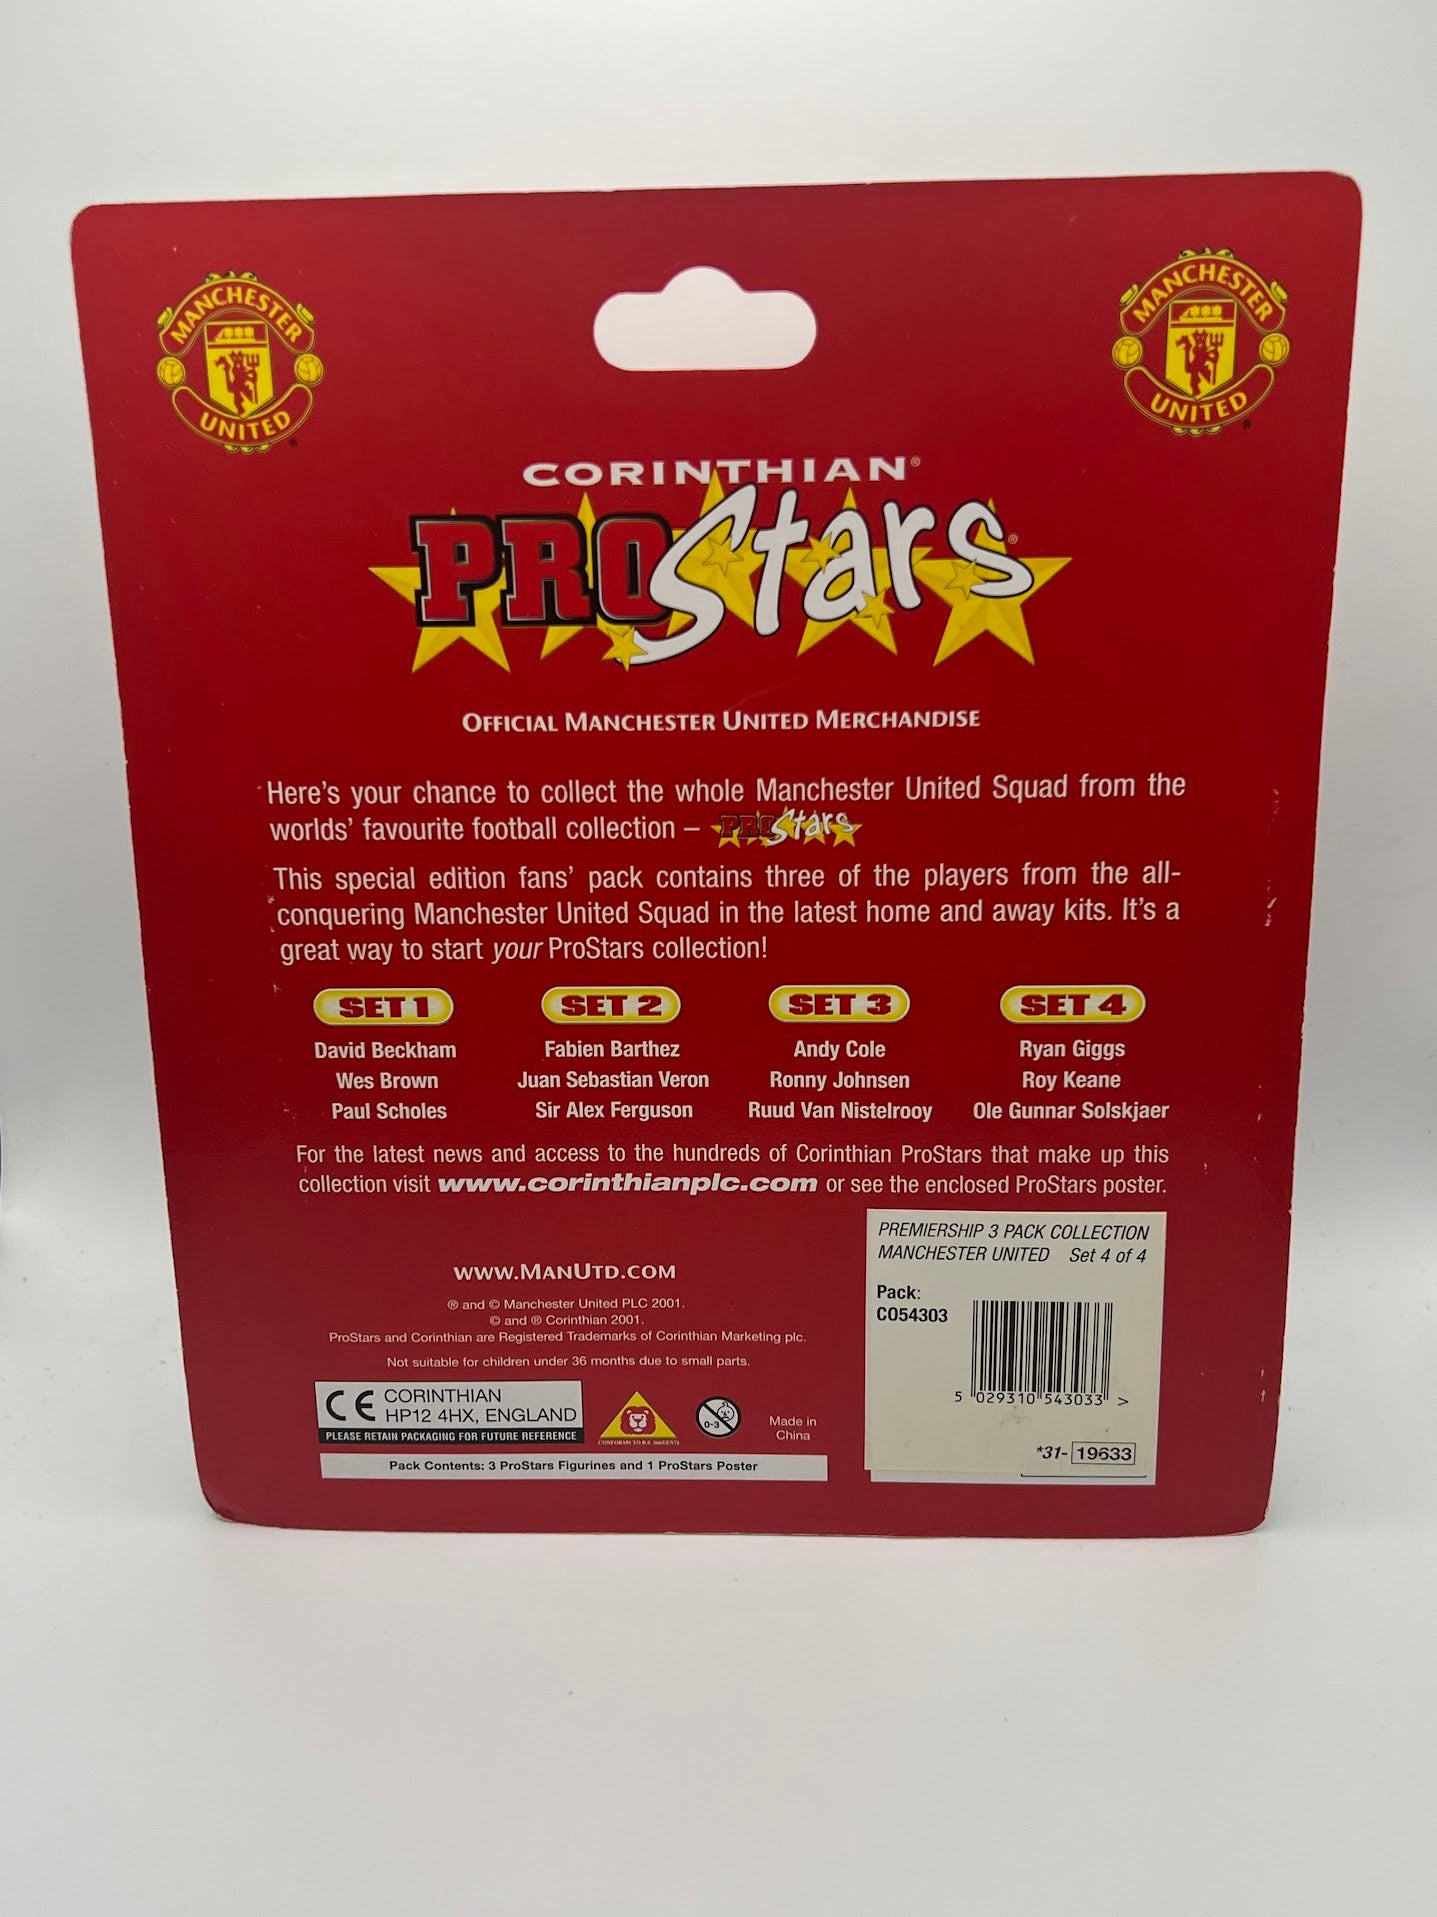 Manchester United Multi Pack -  3 Pack 1 Manchester United Corinthian Football Figures - Set 4 of 4